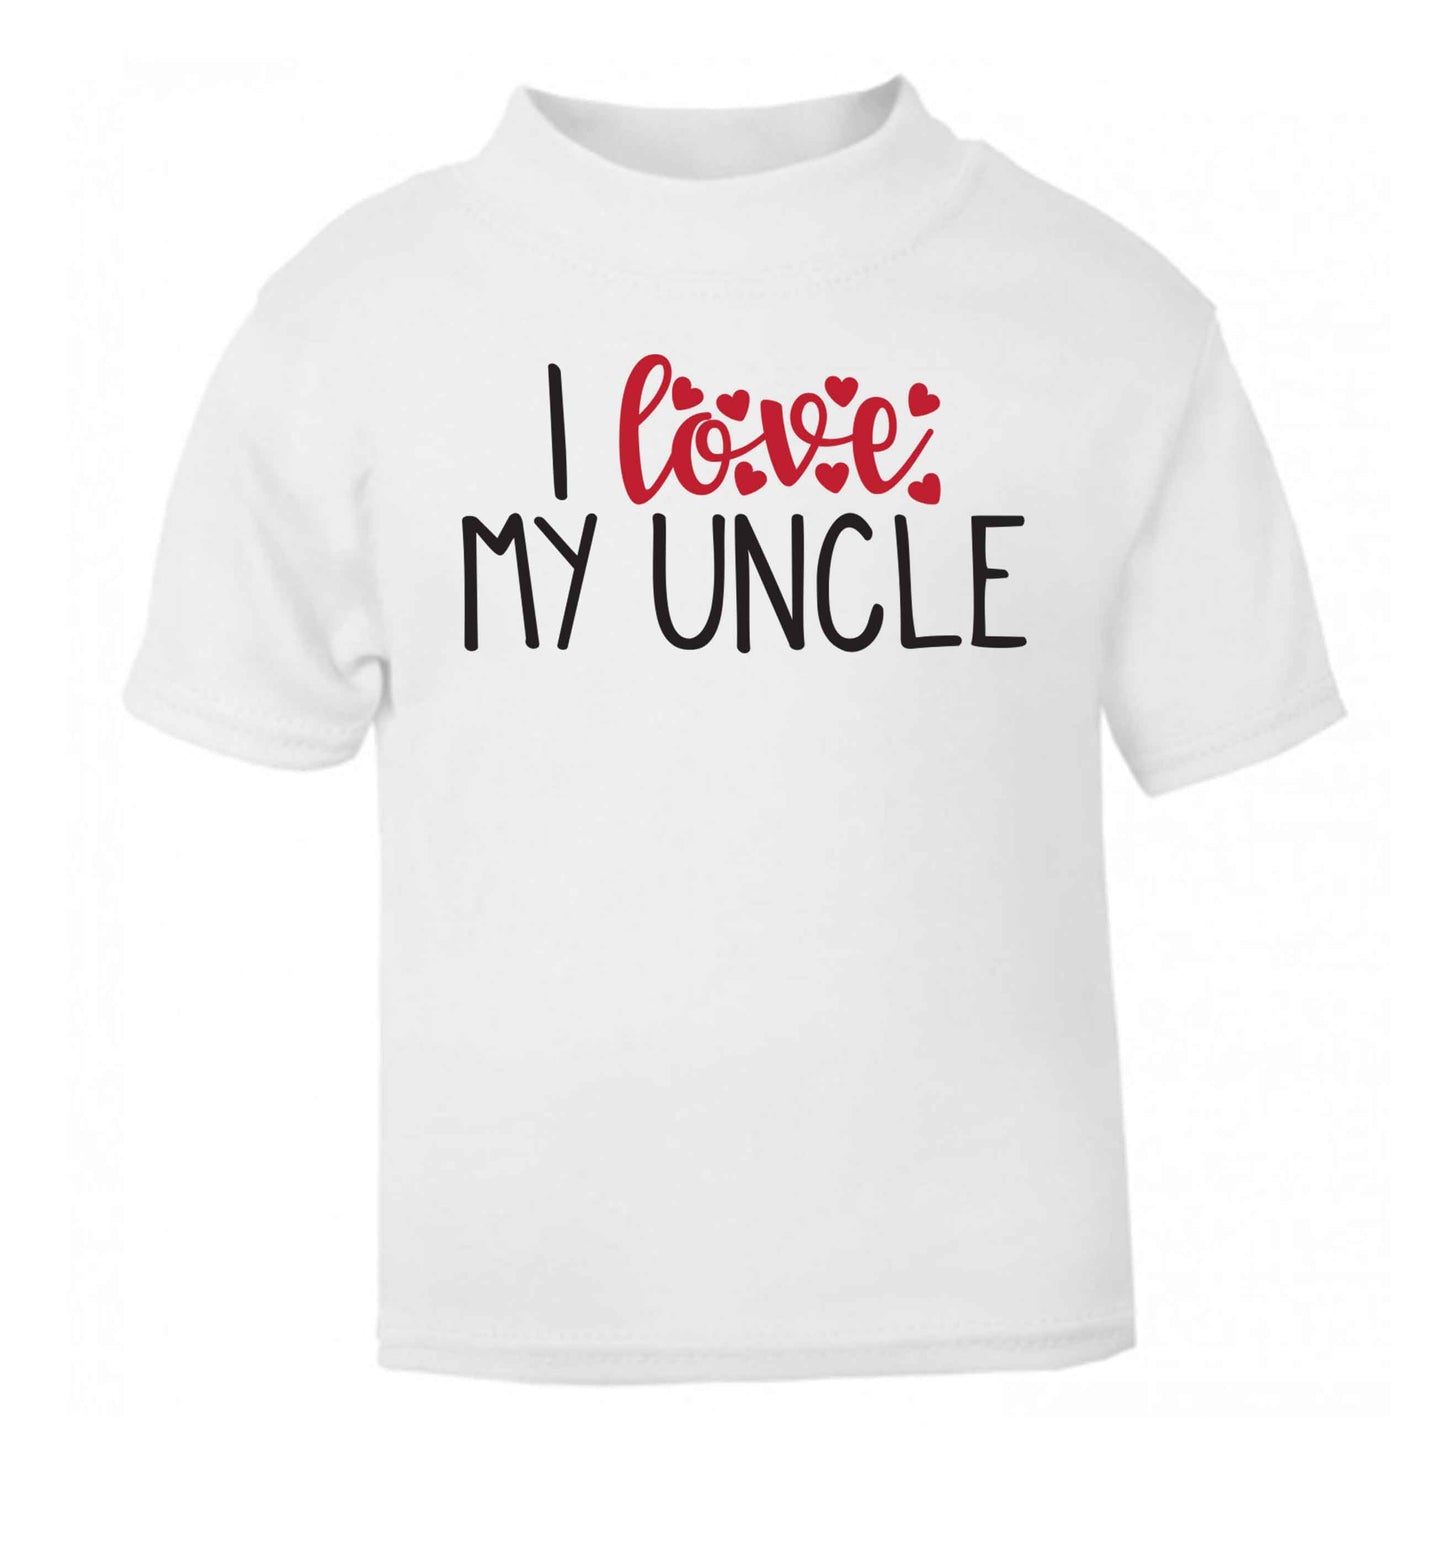 I love my uncle white Baby Toddler Tshirt 2 Years